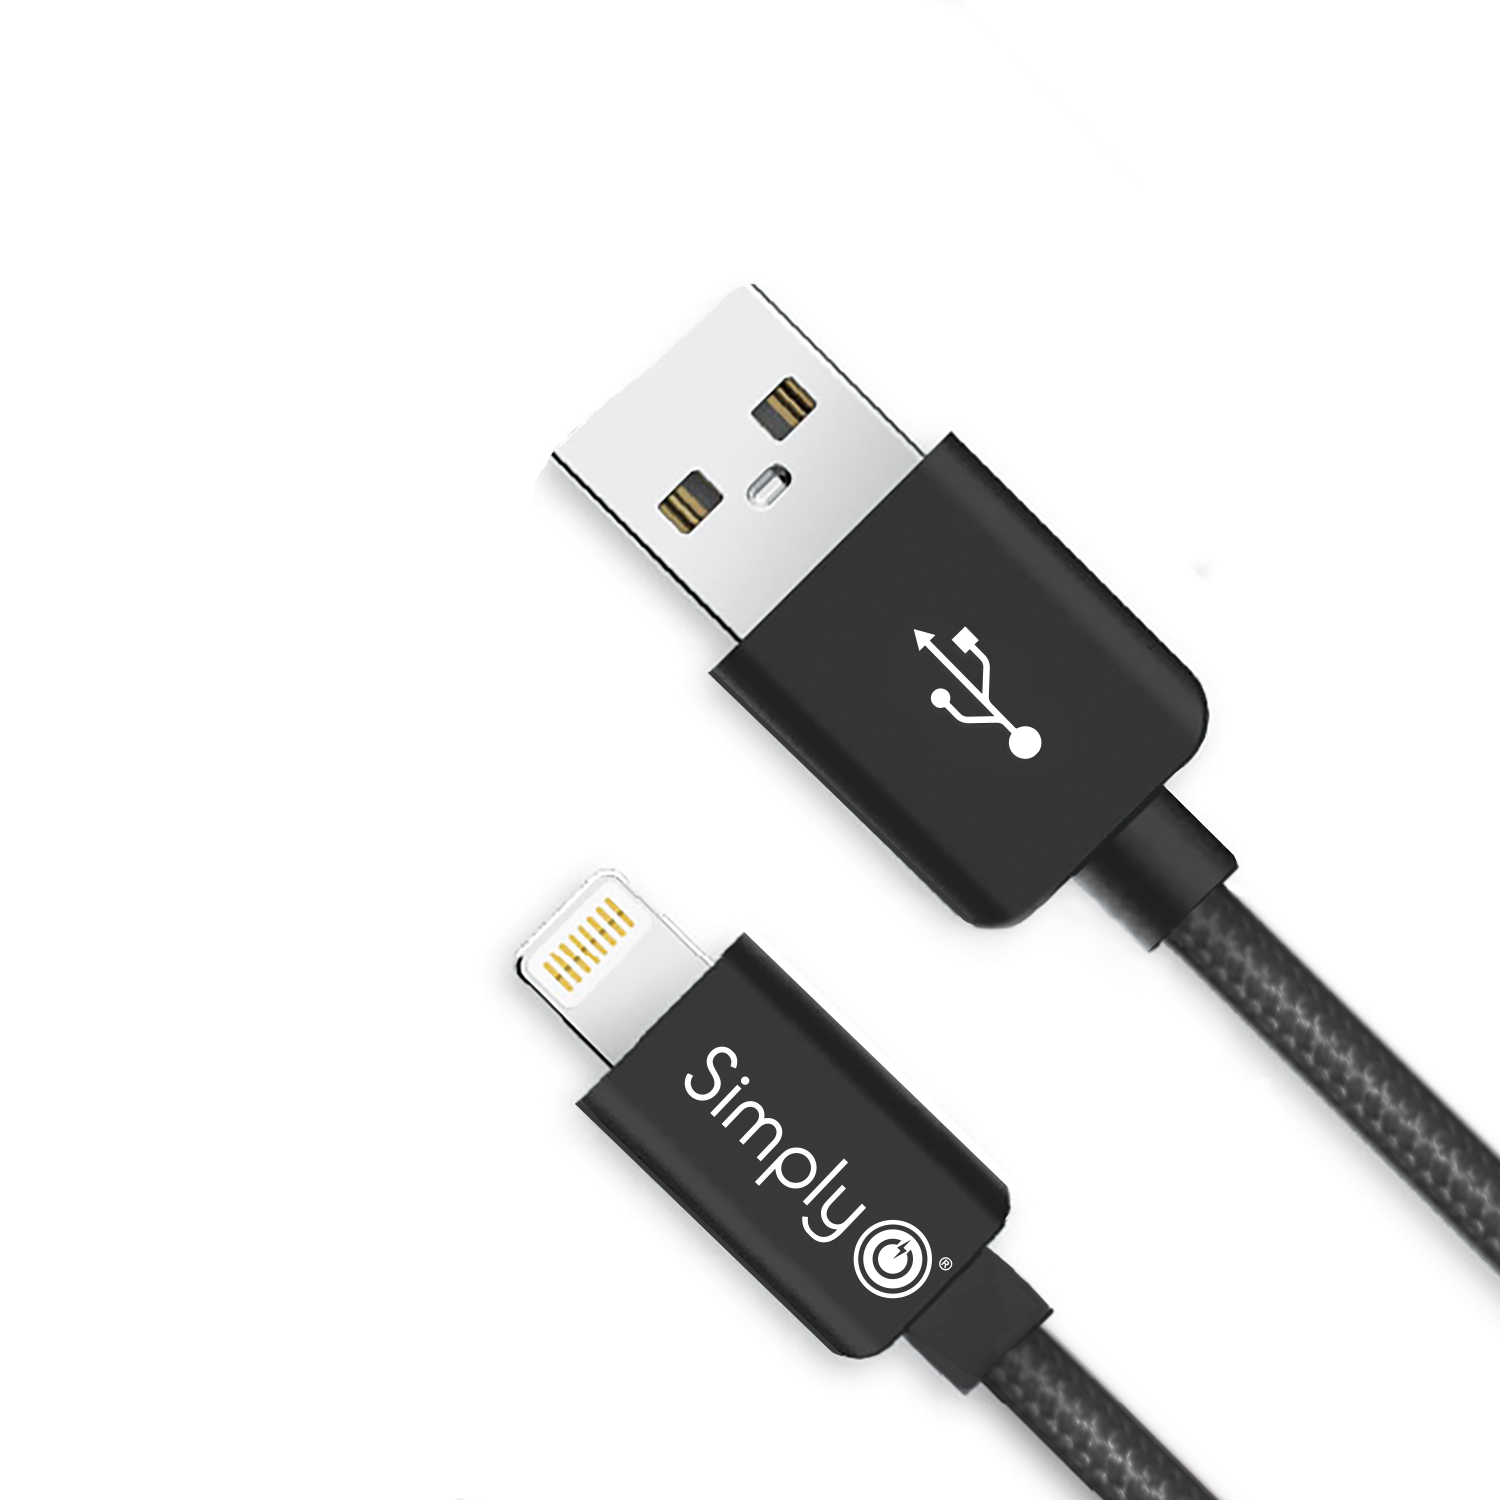 MFI USB - IPHONE BRAIDED CABLE 1.5M BLACK